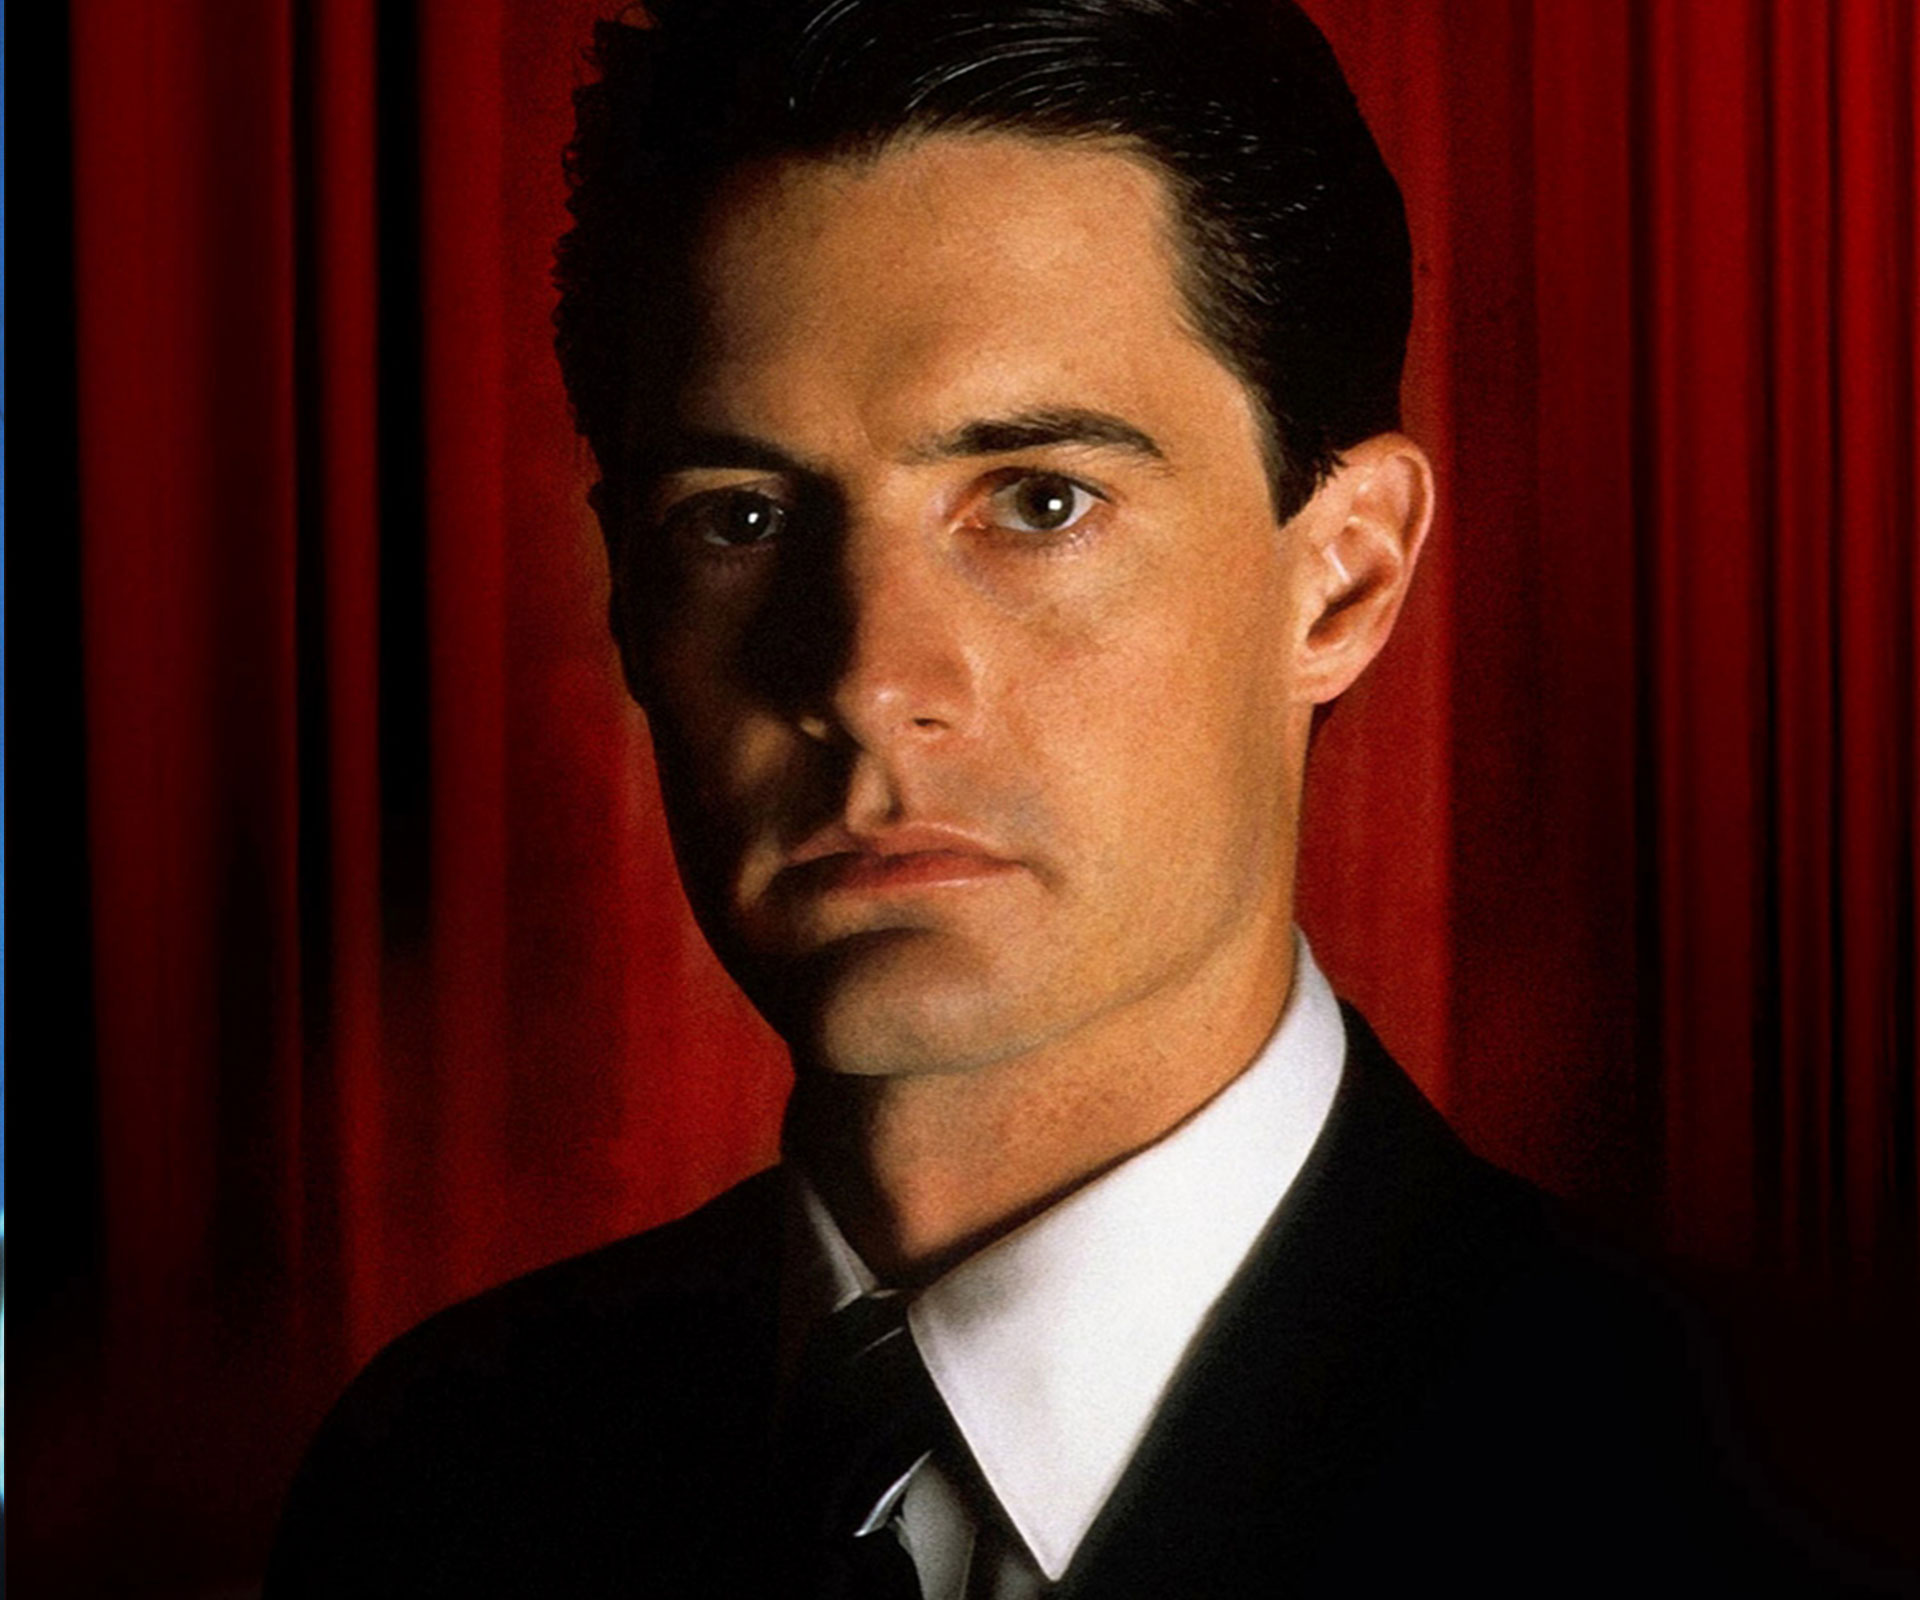 Catch up with the biggest moments from Twin Peaks so far